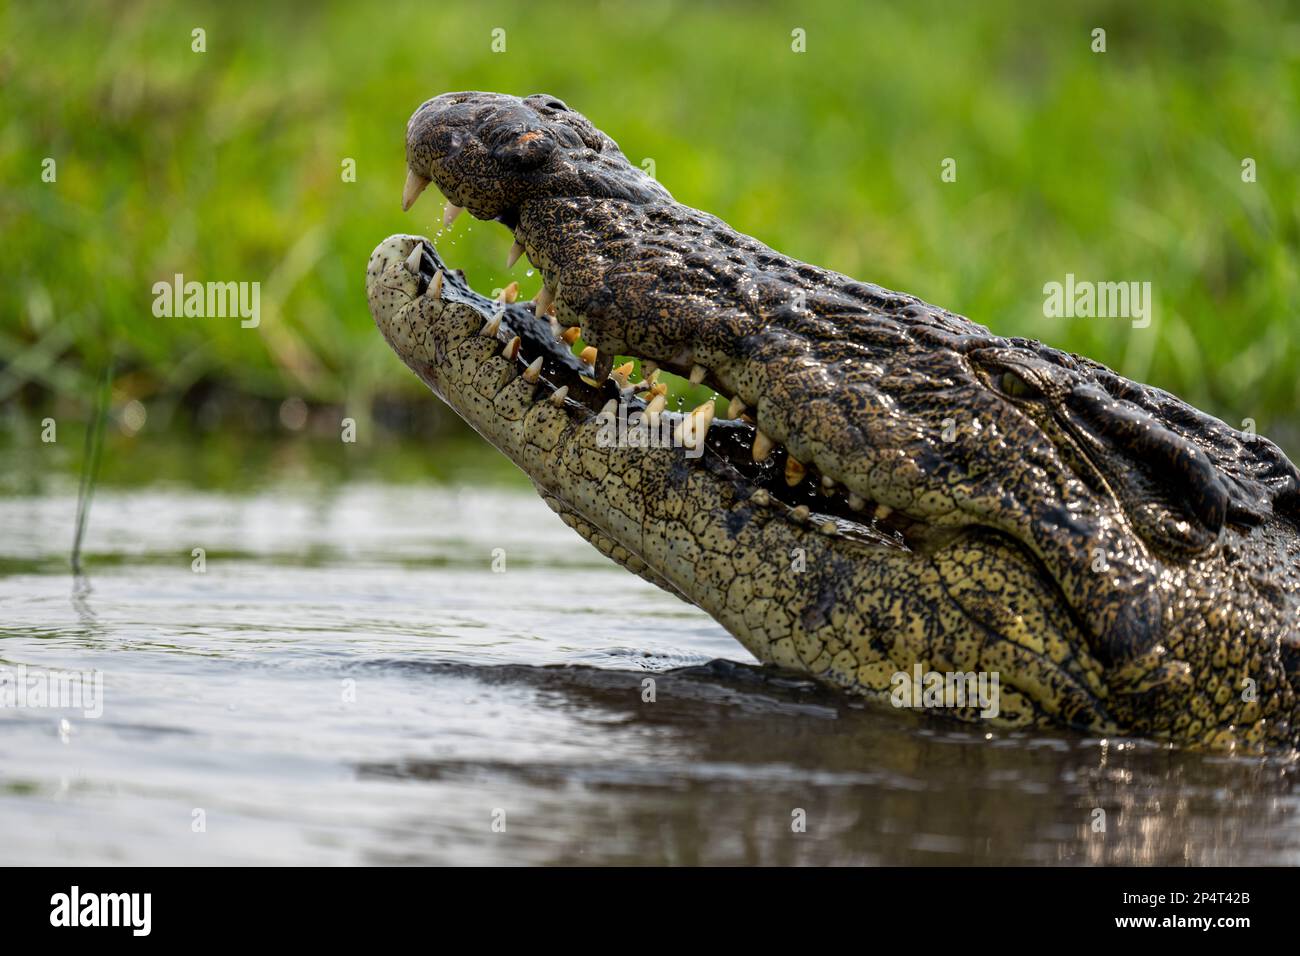 Crocodile head out of water with slightly opened mouth surrounded by green gras and water in botswana chobe river Stock Photo